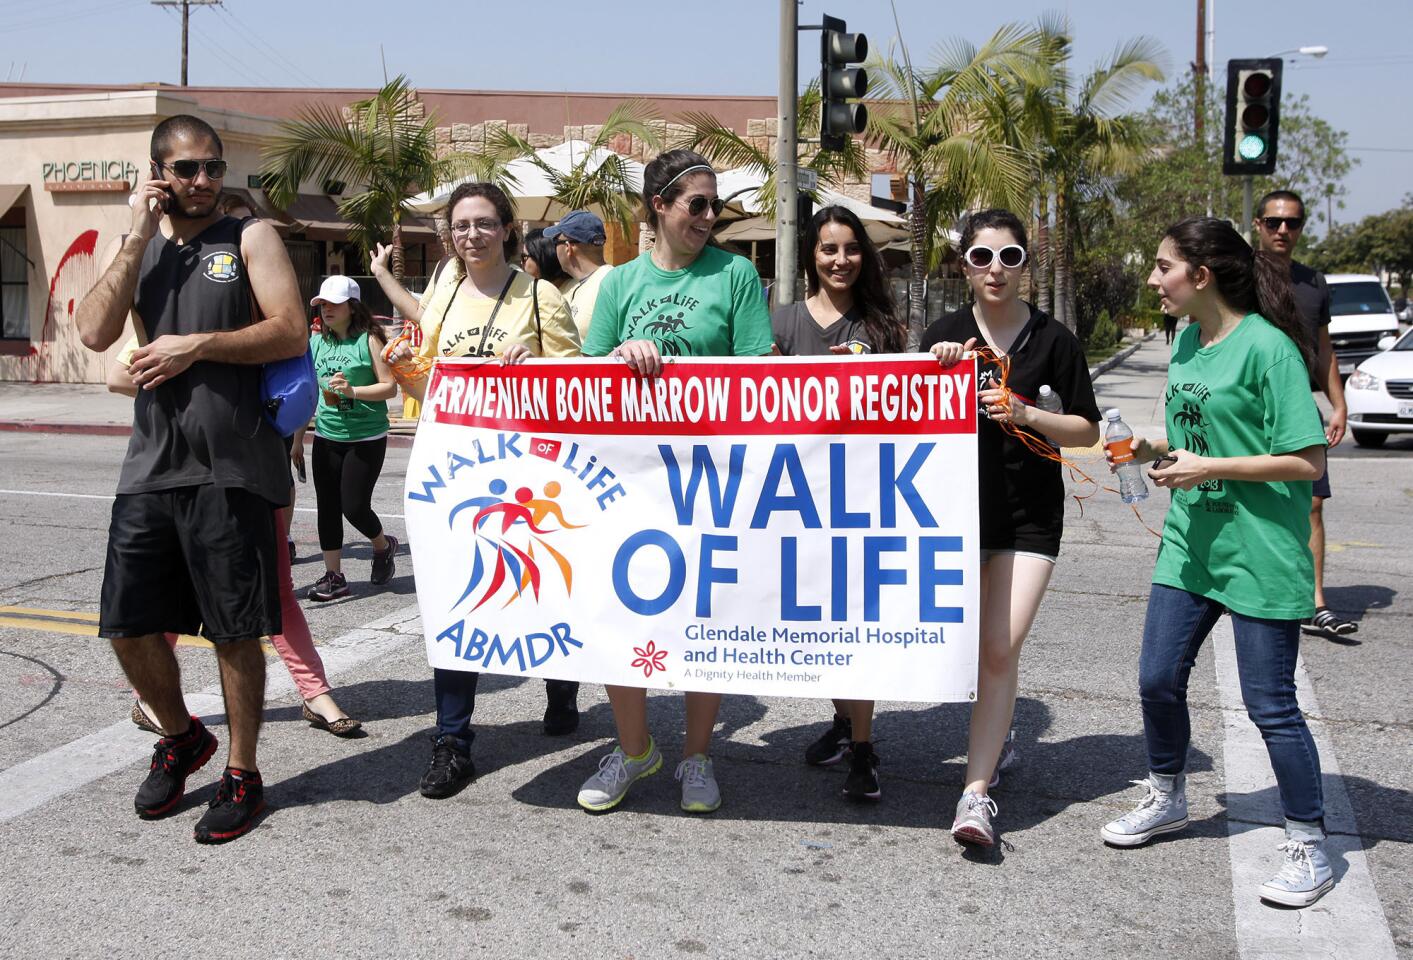 A group of walkers carried an official sign in the Armenian Bone Marrow Donor Registry Annual Walk of Life walk-a-thon in Glendale on Saturday, May 4, 2013. Participants began their walk at Glendale Memorial Hospital, walked north on Central Ave., west on Lexington to Brand Blvd. and back south to the hospital.